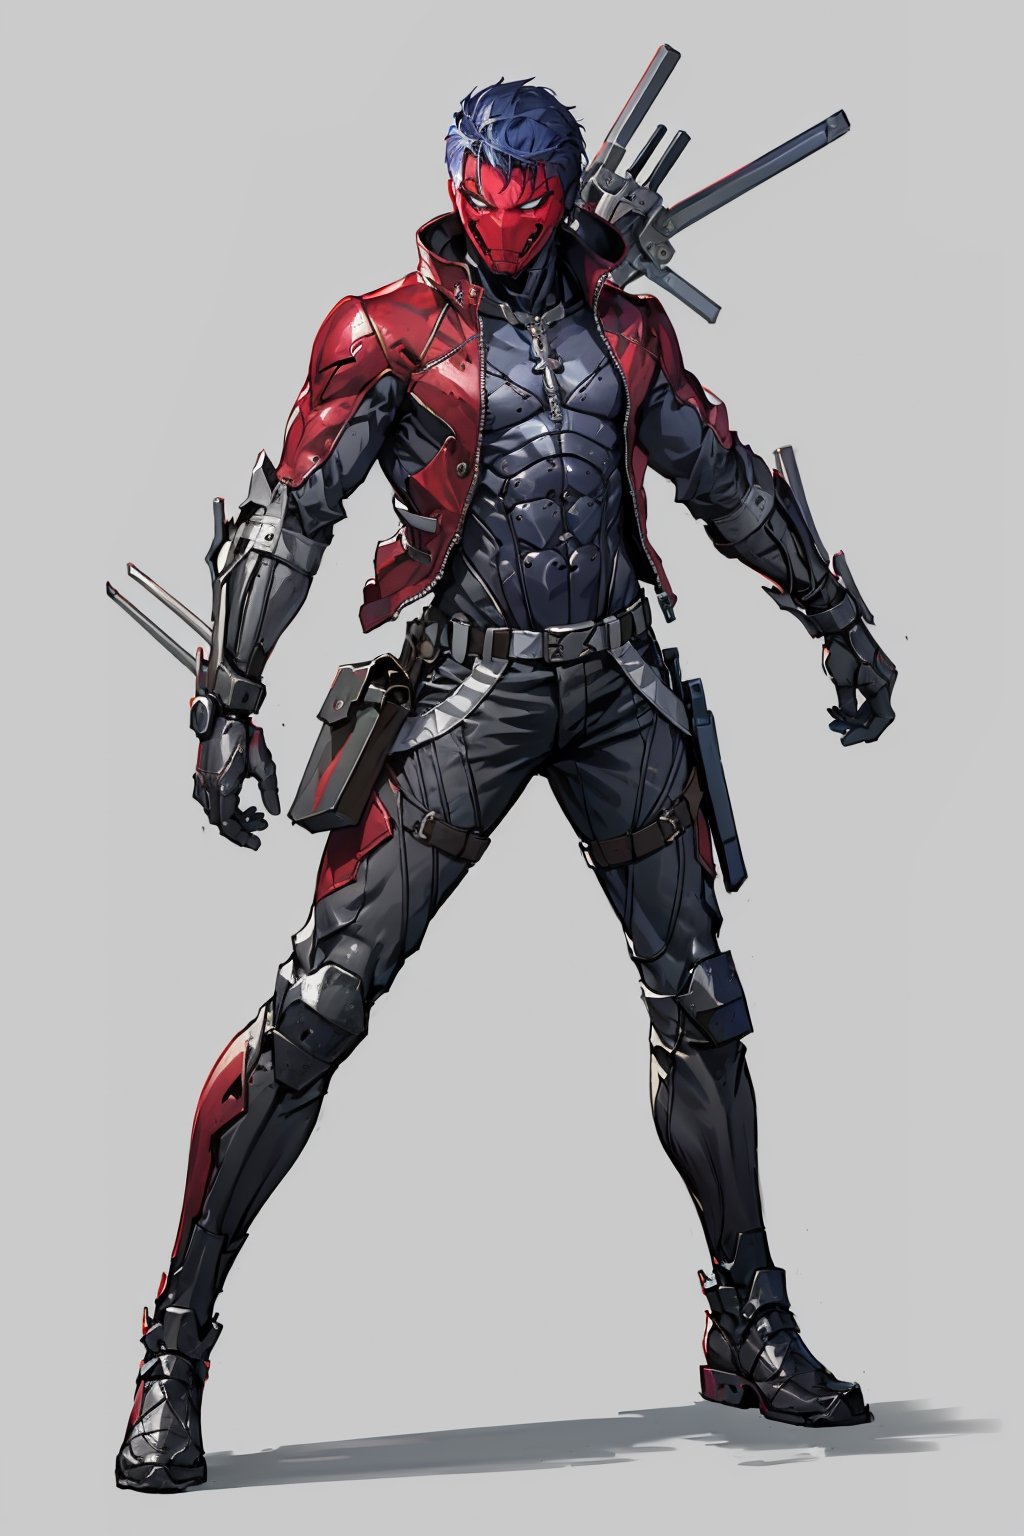 
an accurate and detailed full-body shot of a male superhero character named Wraith, tall and lean bulid, (Crimson half-mask:1.3), exposed cybernetic red eye, grafted cybernetic jawline, (Spiky white fringe hair:1.2), (choppy black undercut hairstyle:1.3), (Skintight black ninja-tech suit with crimson energized circuitry:1.1), (electric blue biker jacket:1.1), asymmetric collar, rolled sleeves, Gunmetal armor plates on shoulders, chest emblem, (Fitted burgundy leather moto-pants), (blue-gray armorized cargo panels), Knee guards, armored greaves, black combat boots, cyberized gunmetal strike gauntlet, Holsters, sheaths, tech-utility pouches, holding an obsidian high-frequency katana, masterpiece, high quality, 4K, raidenmgr, nero, rhdc, a man, red helment, brown leather jacket, gray skintight suit, gloves, belt, boots,red helmet